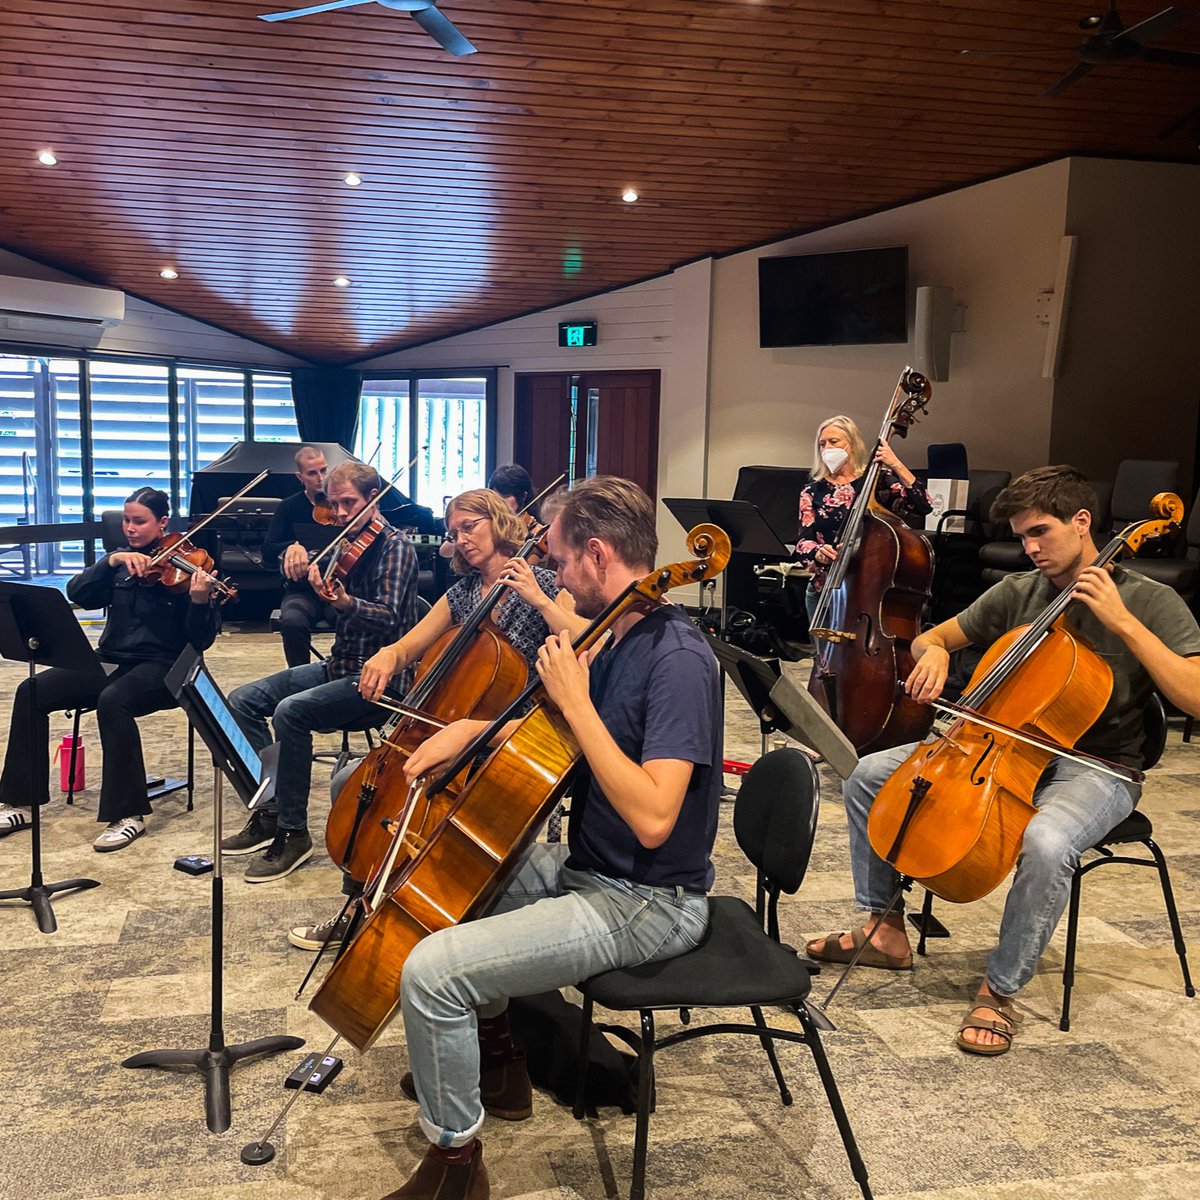 Rehearsals are in full swing for Beef Australia ahead of our performance on Tuesday 7 May in #Rockhampton! Don’t miss out! Find out more → bit.ly/4afPZqw